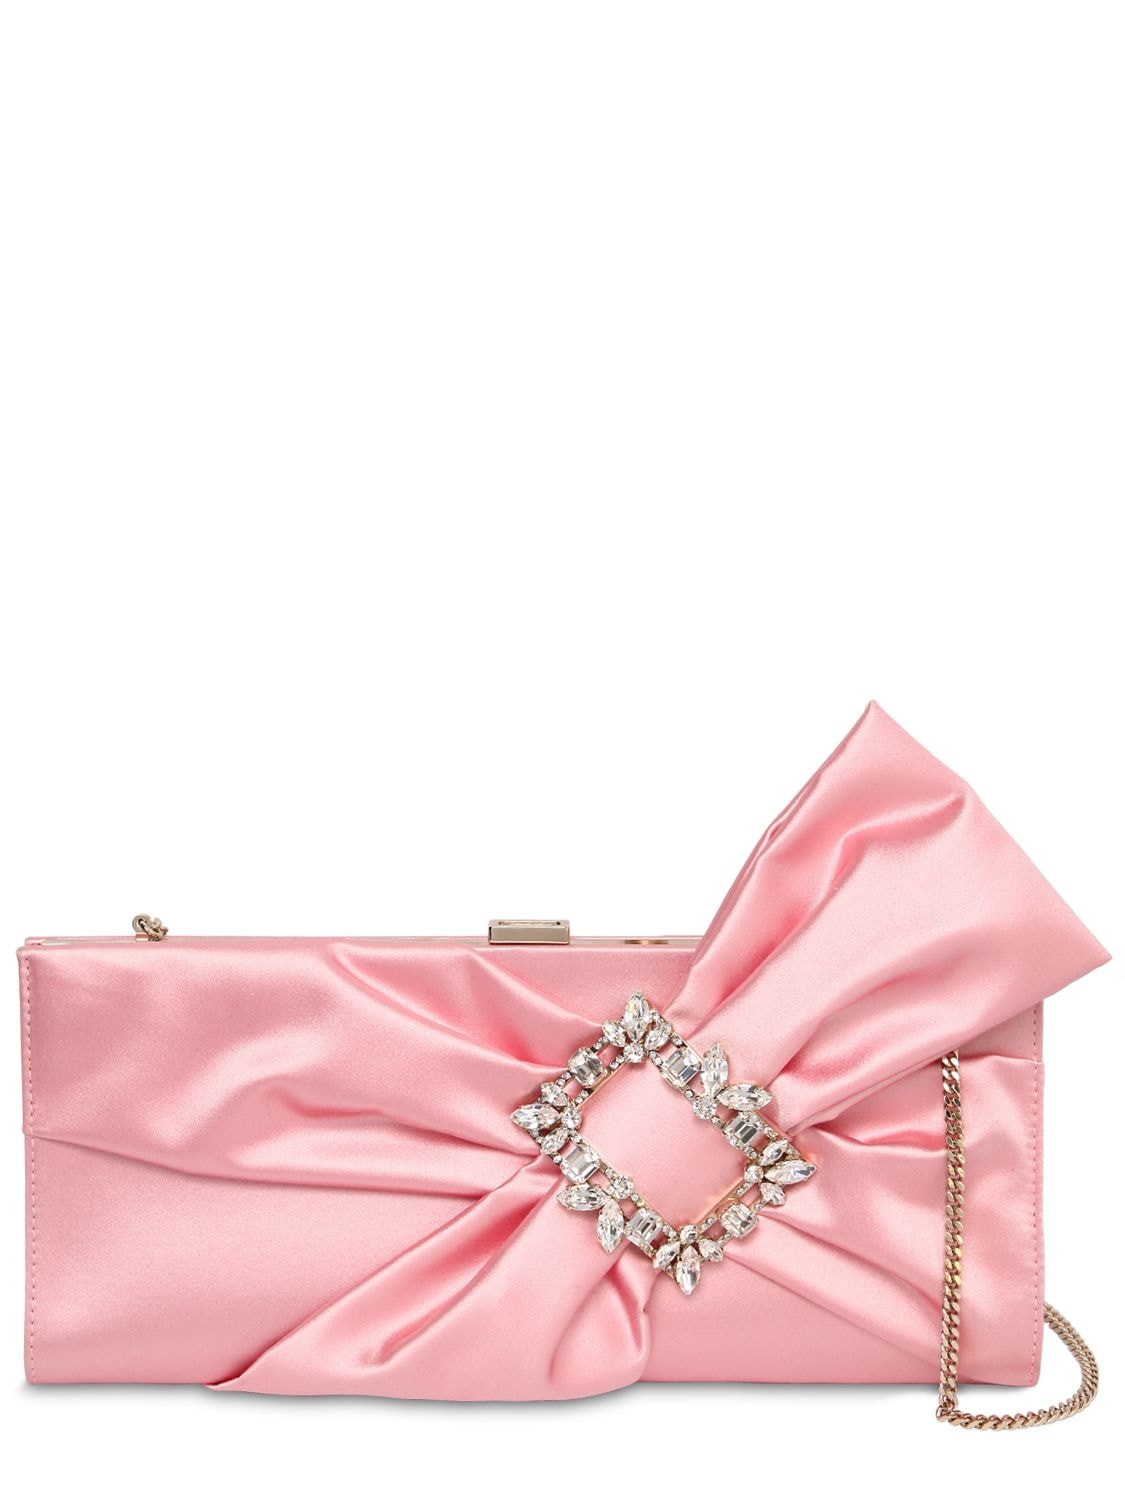 Roger Vivier Trianon Satin Clutch W/ Embellished Bow In Pink